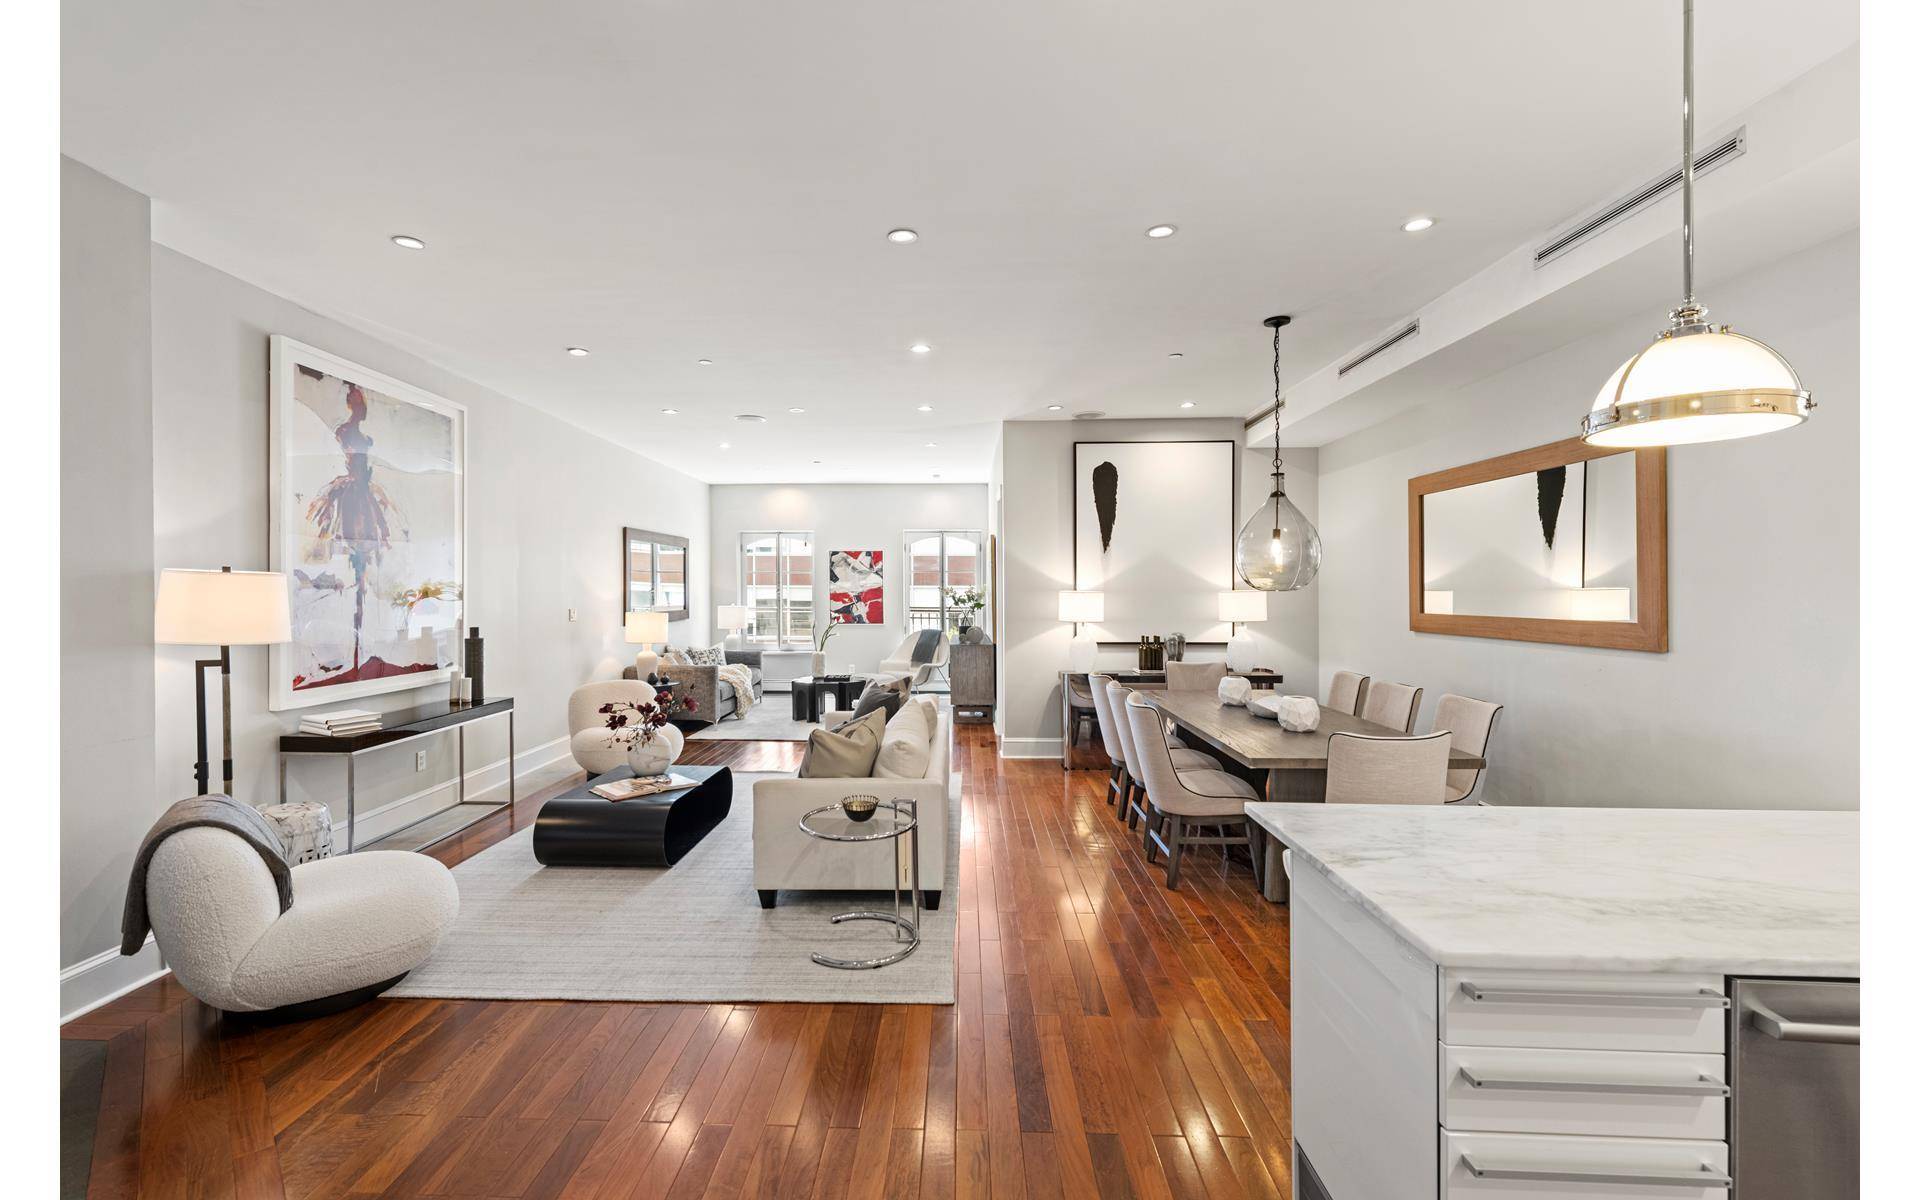 Welcome home to this full floor designer loft in the heart of Tribeca.